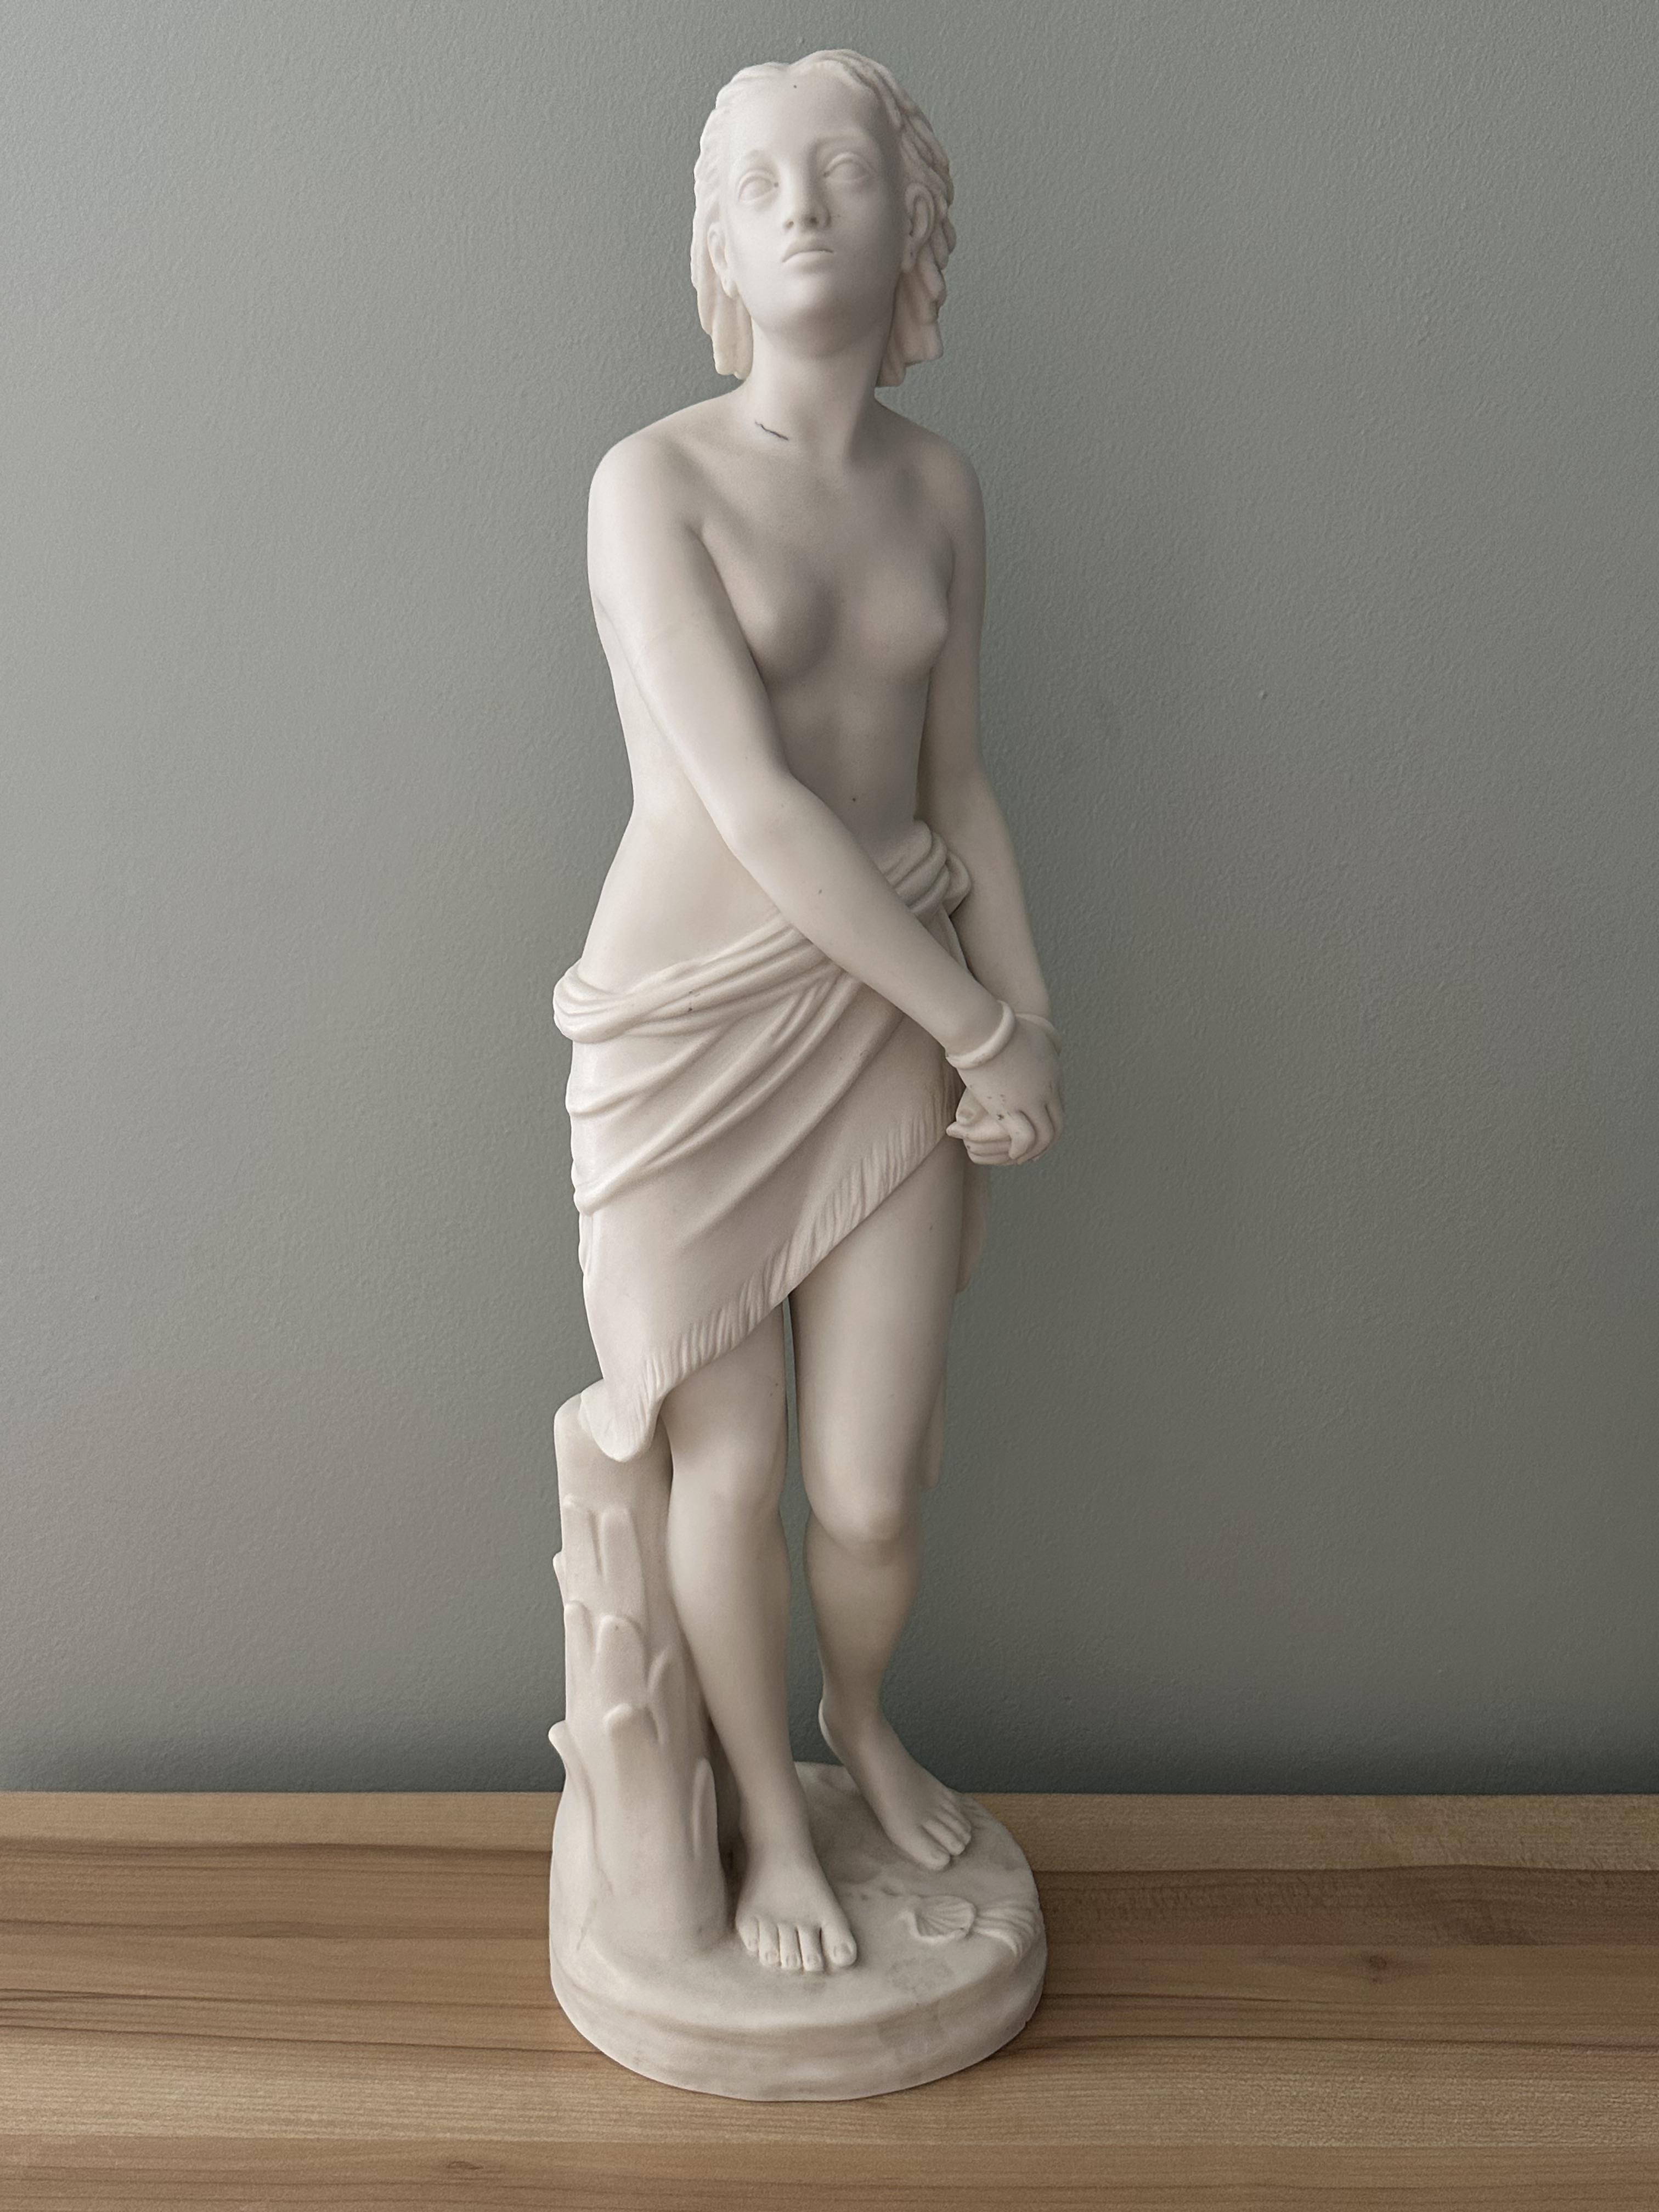 Parian Ware Minton Sculpture by John Bell. One ha - Image 10 of 16